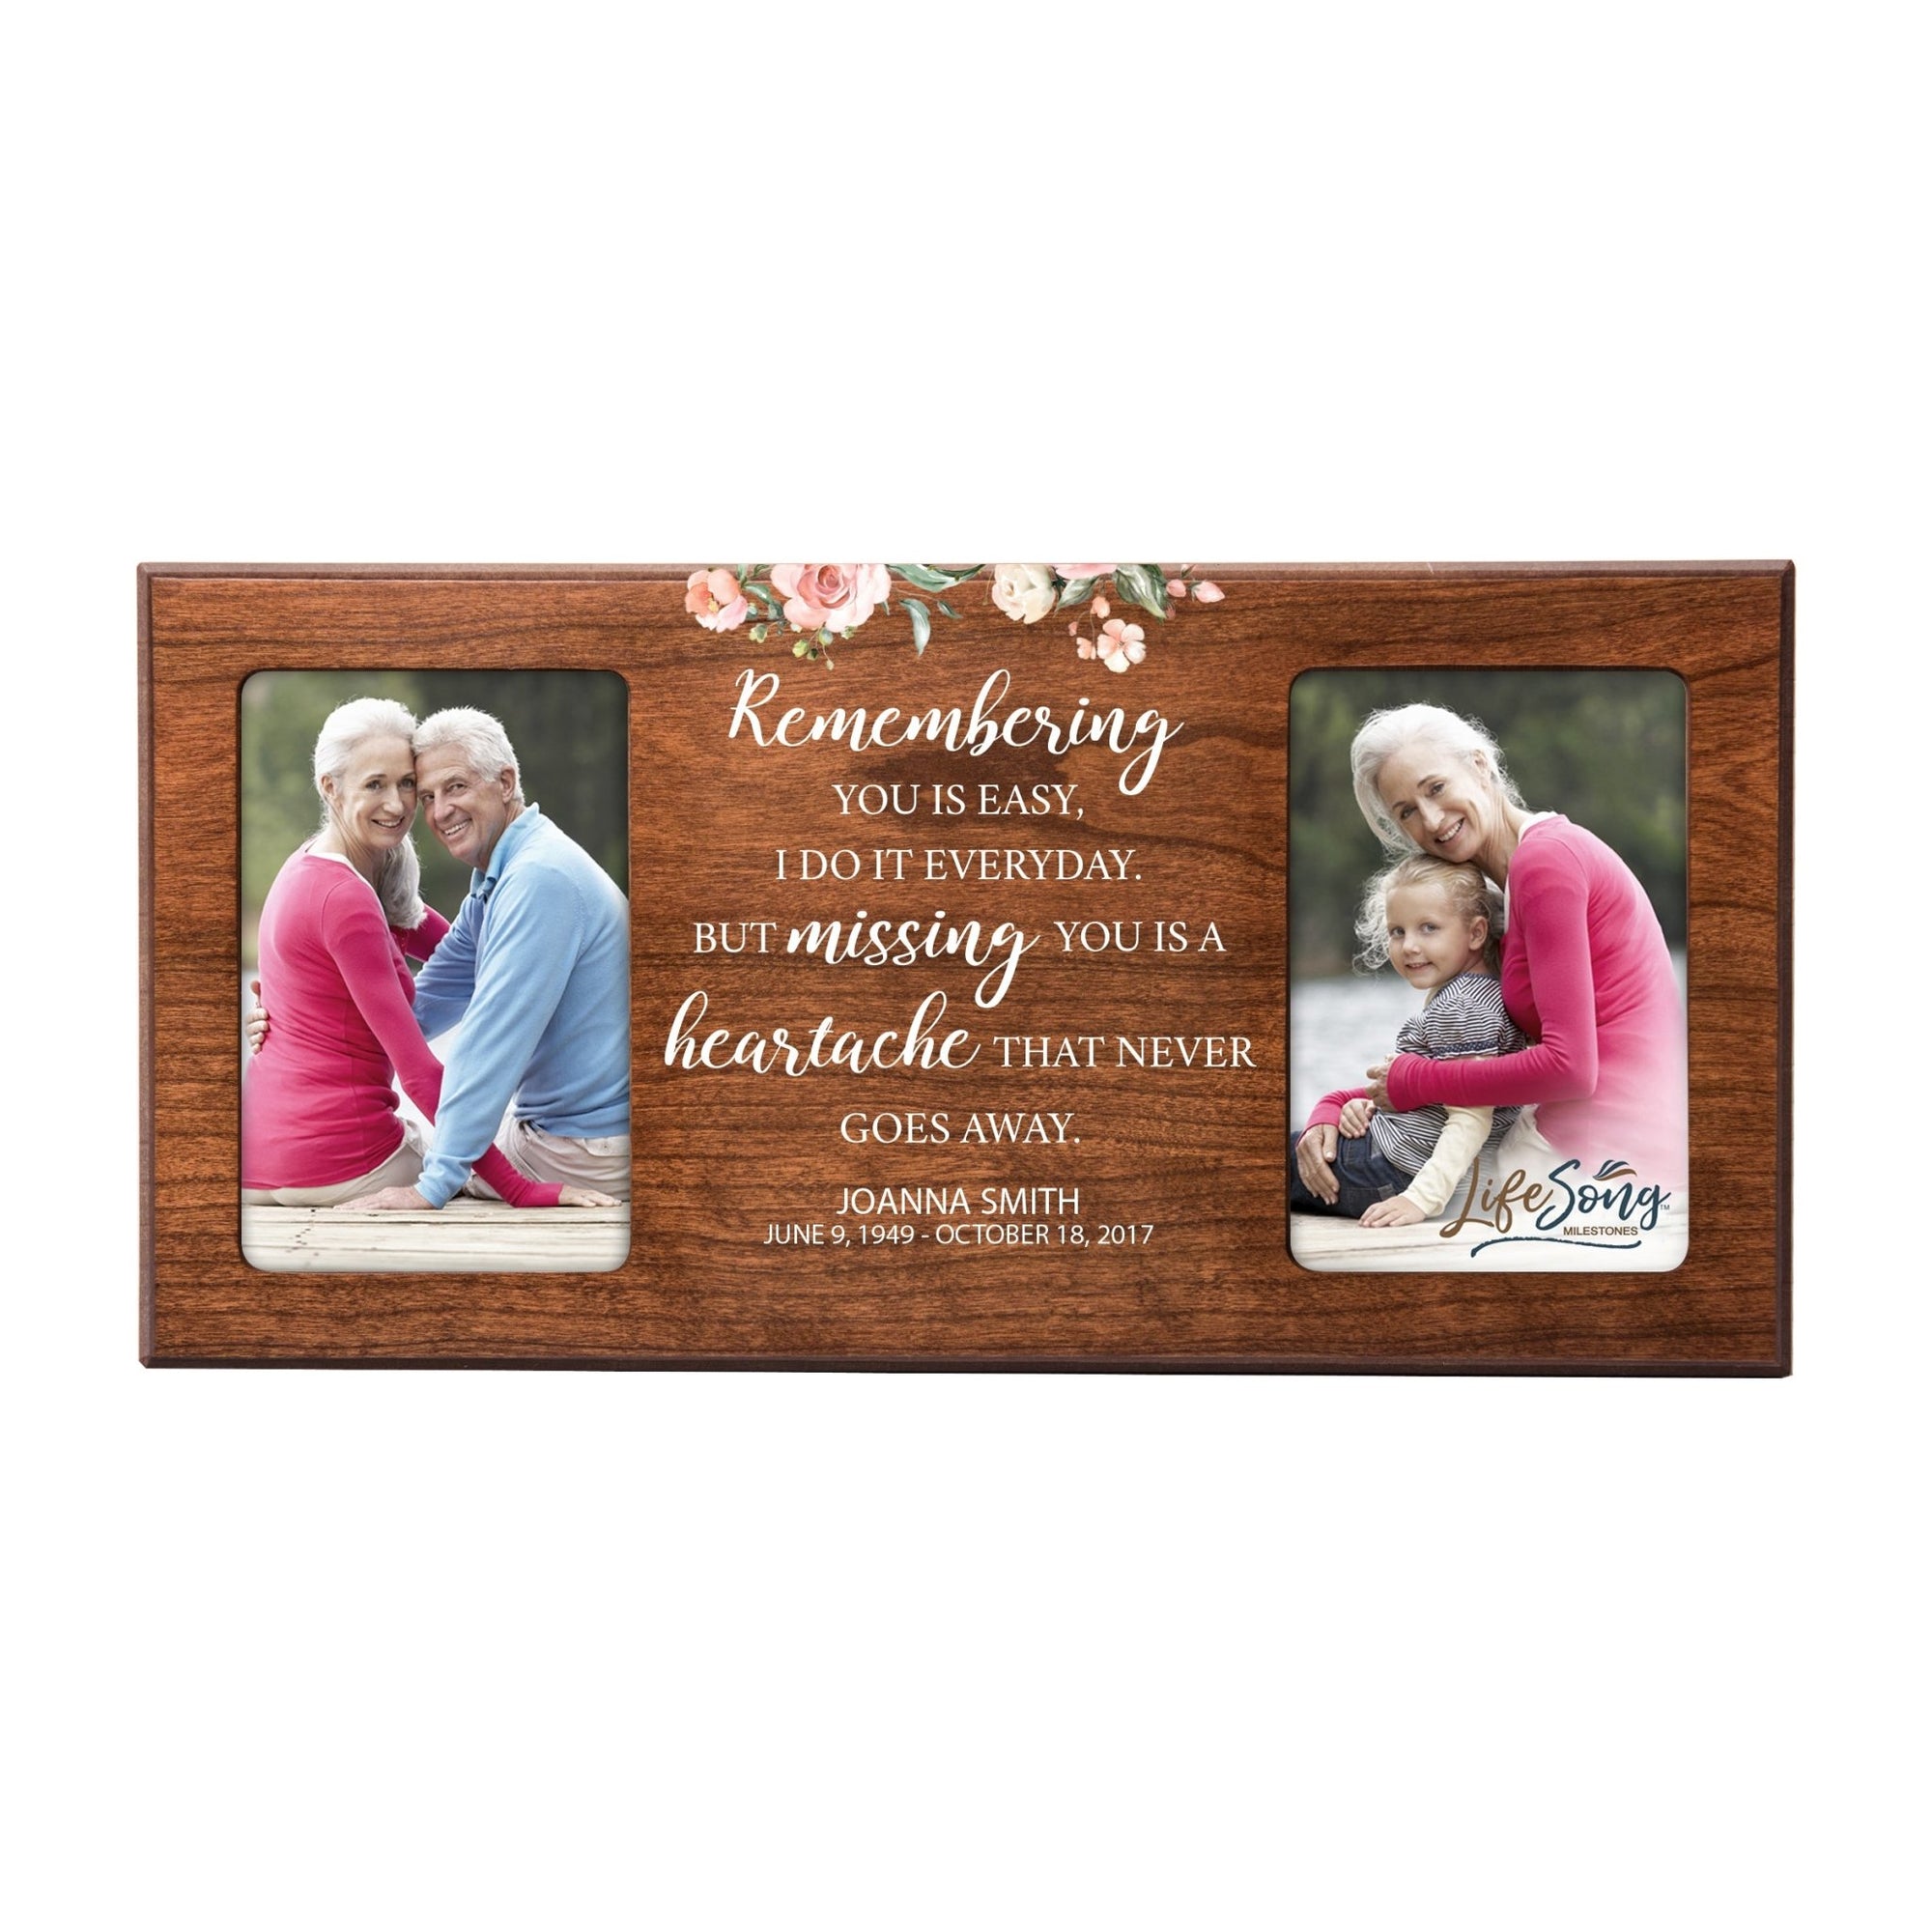 Custom Memorial Picture Frame 16x8in Holds Two 4x6in Photos - Remembering You Is Easy - LifeSong Milestones